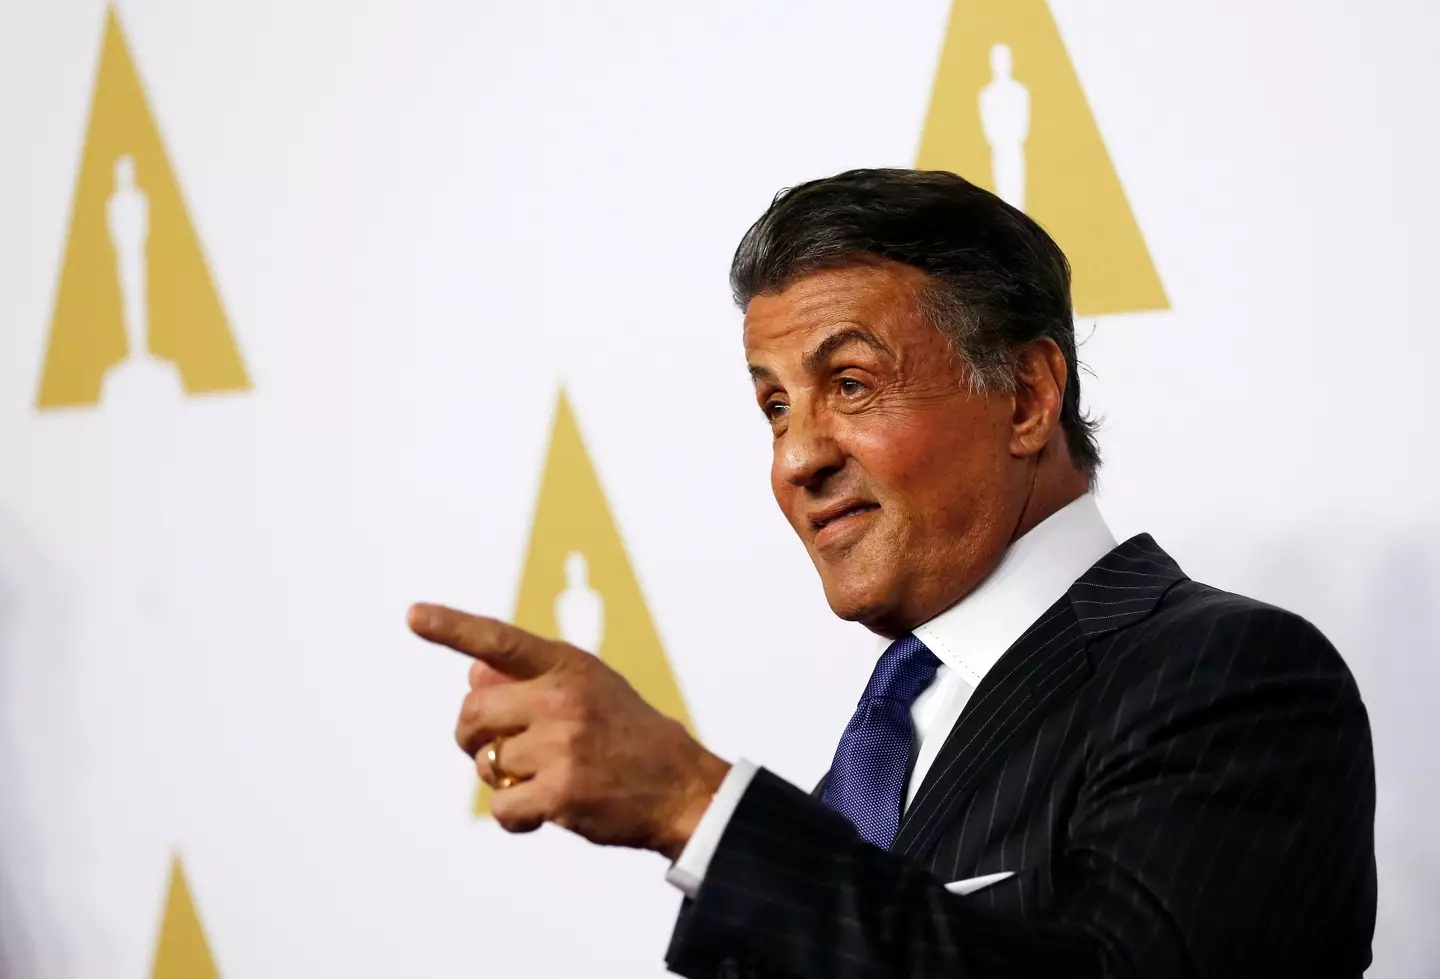 Slyvester Stallone was badly hurt by the punch.